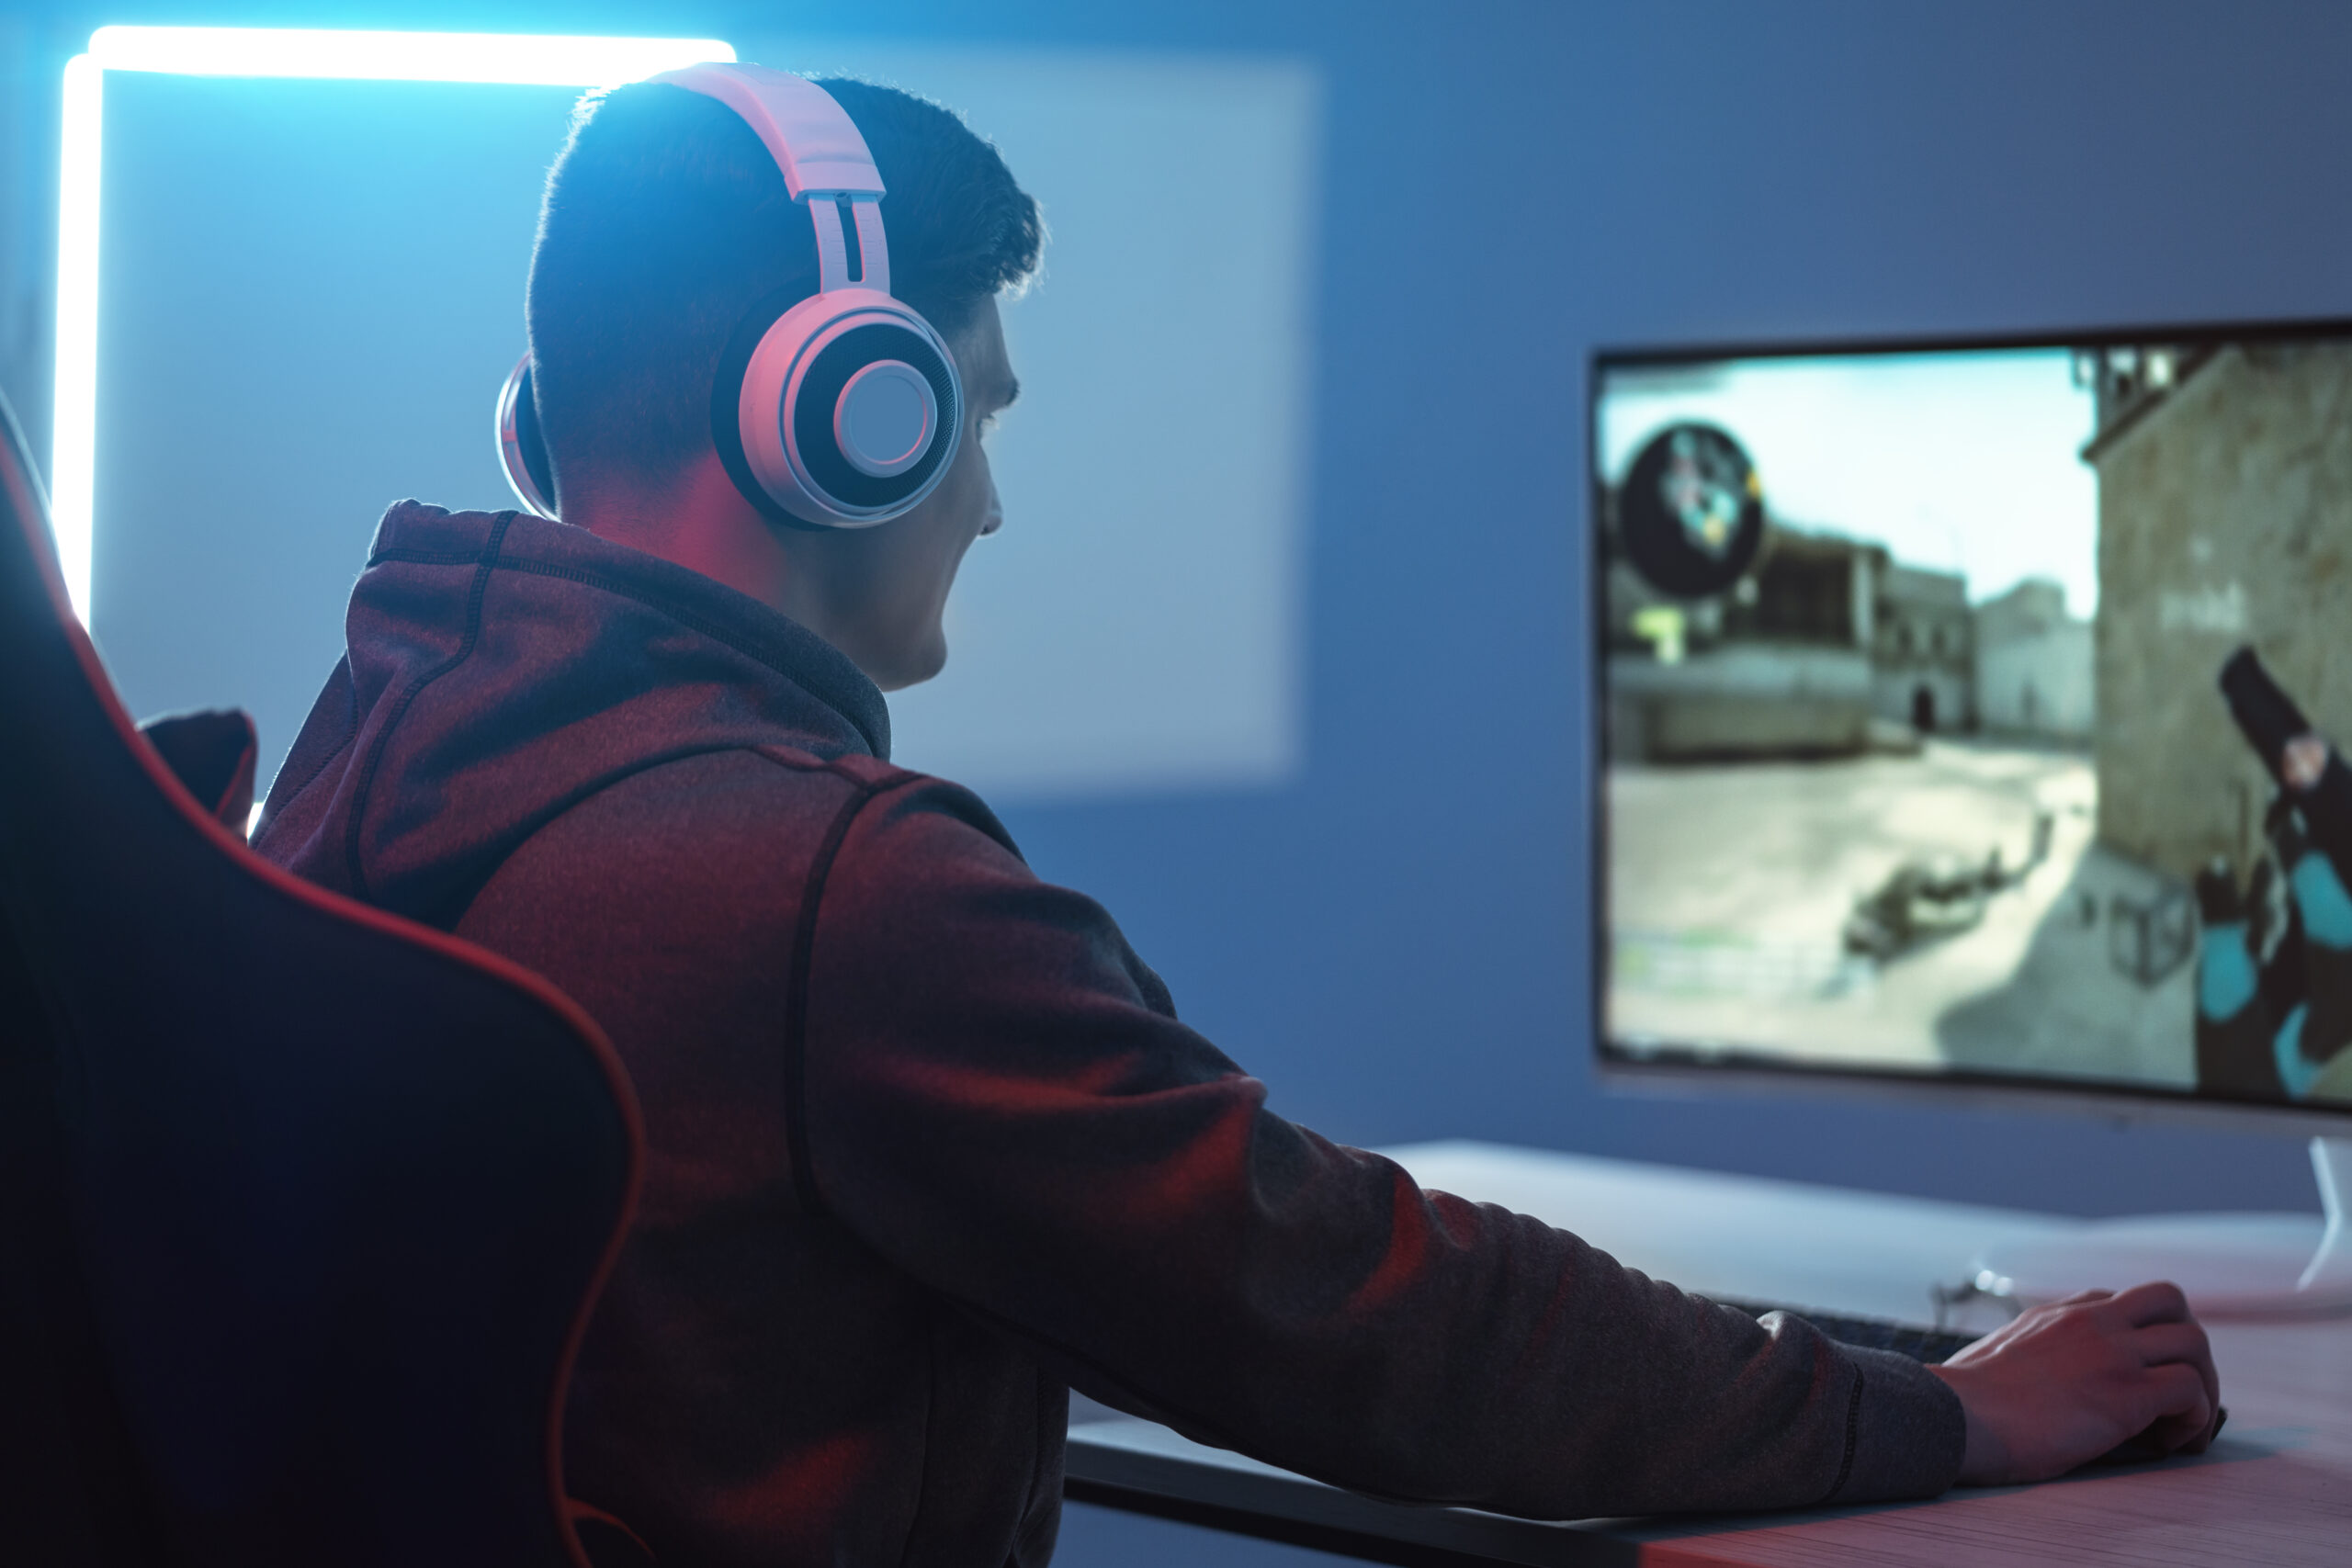 The gamer playing video game on his personal computer